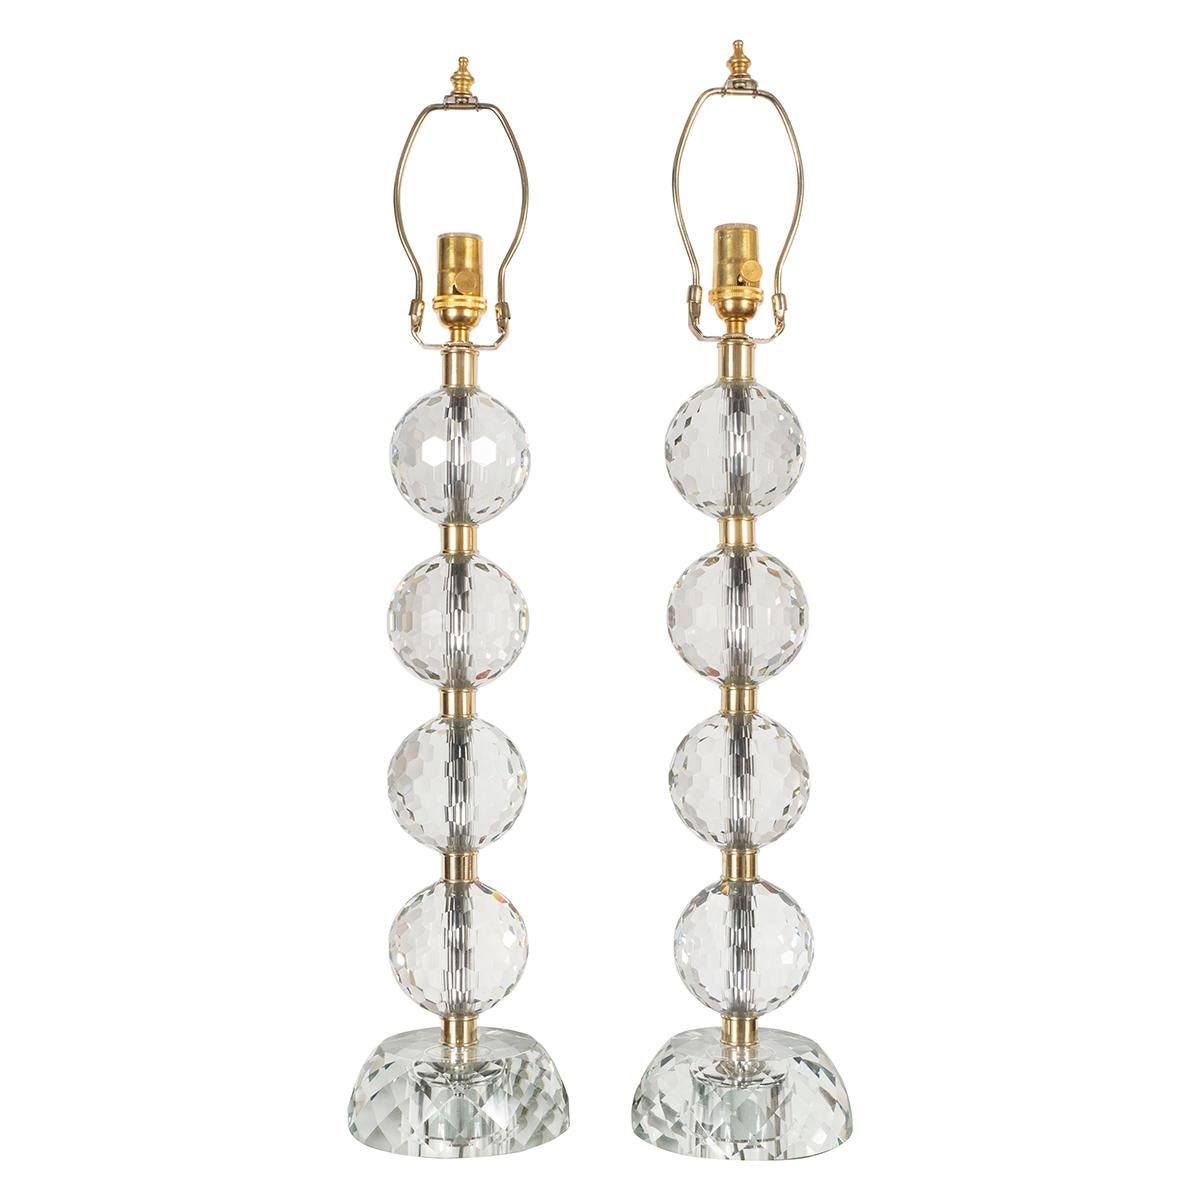 Pair of table lamps composed of stacked faceted glass spheres with faceted glass bases and brass hardware.